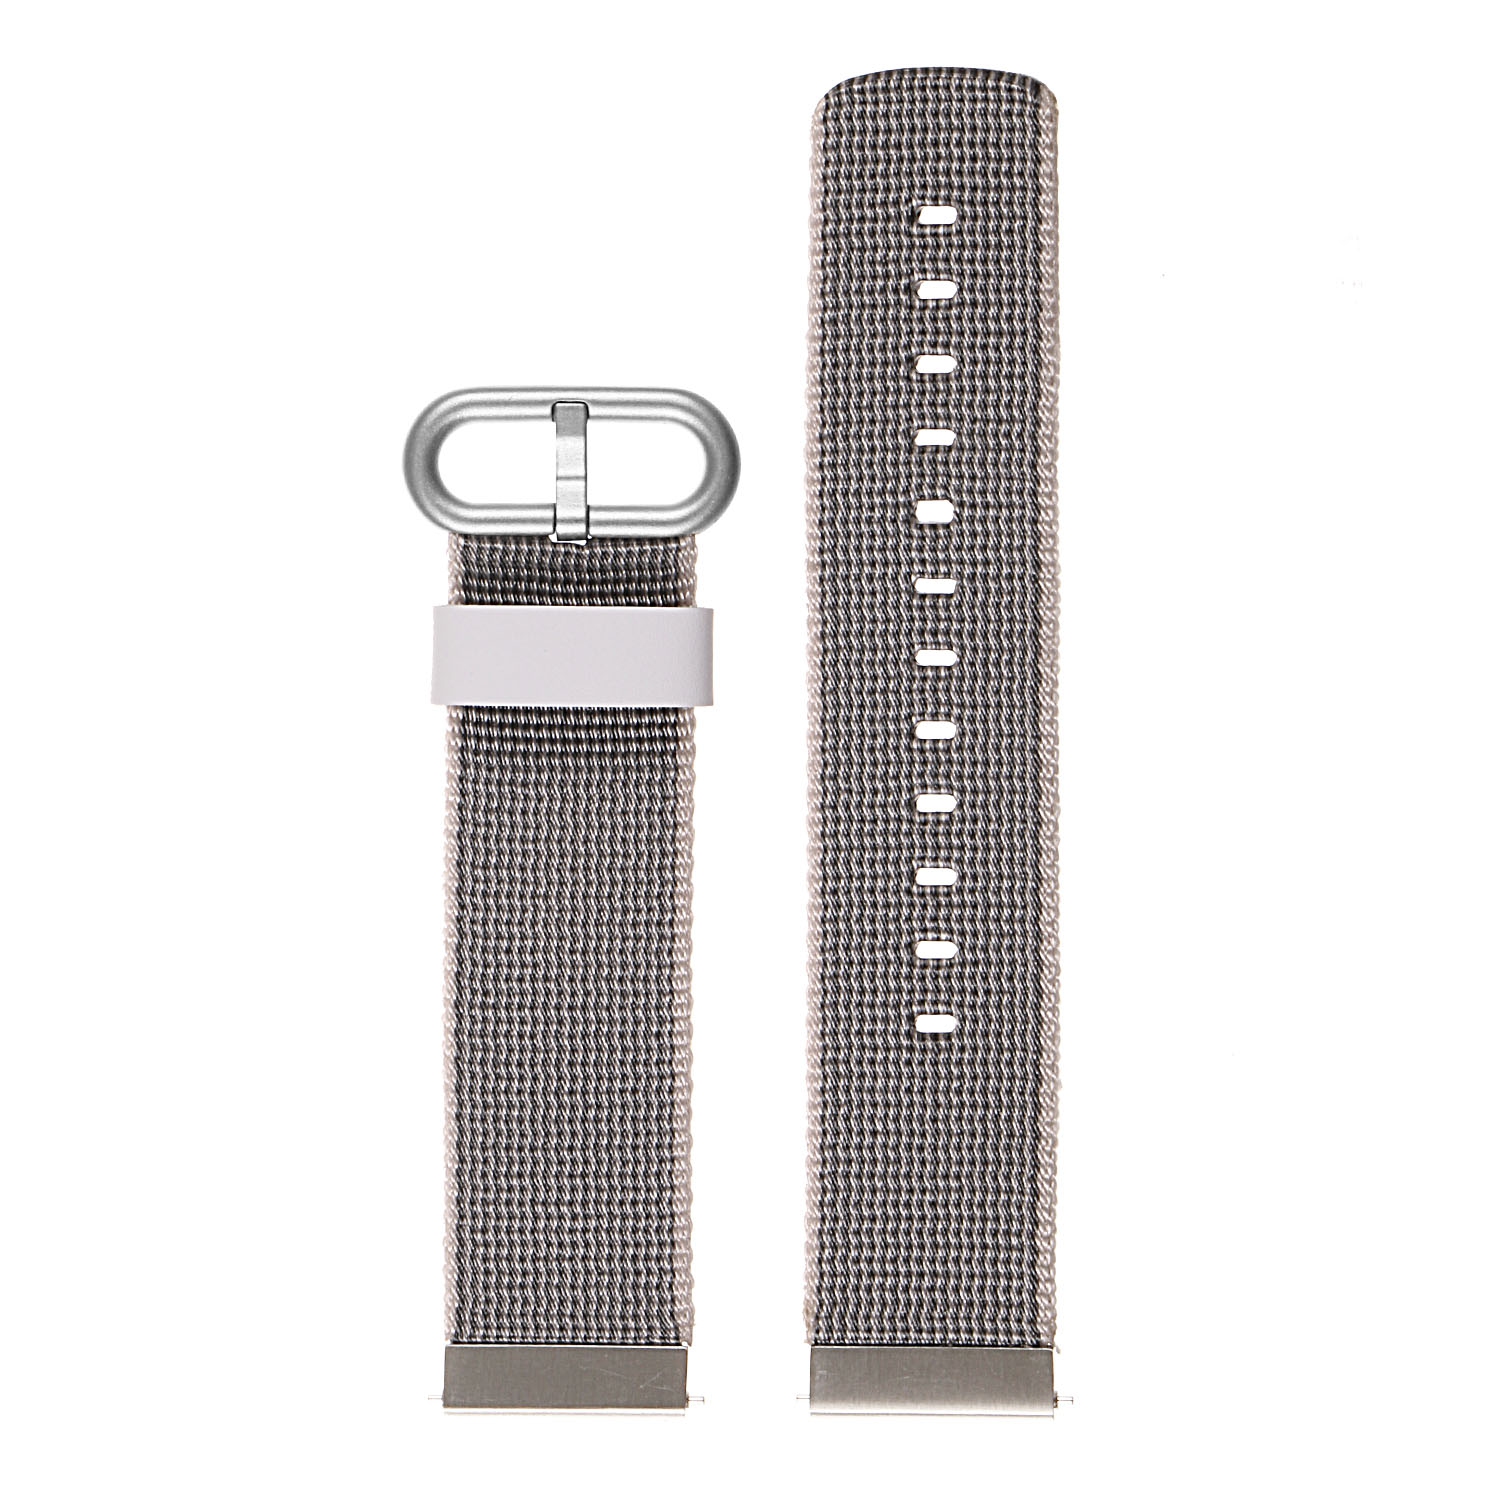 StrapsCo Ballistic Woven Nylon Replacement Watch Band Strap for Samsung Gear S2 Classic - Grey